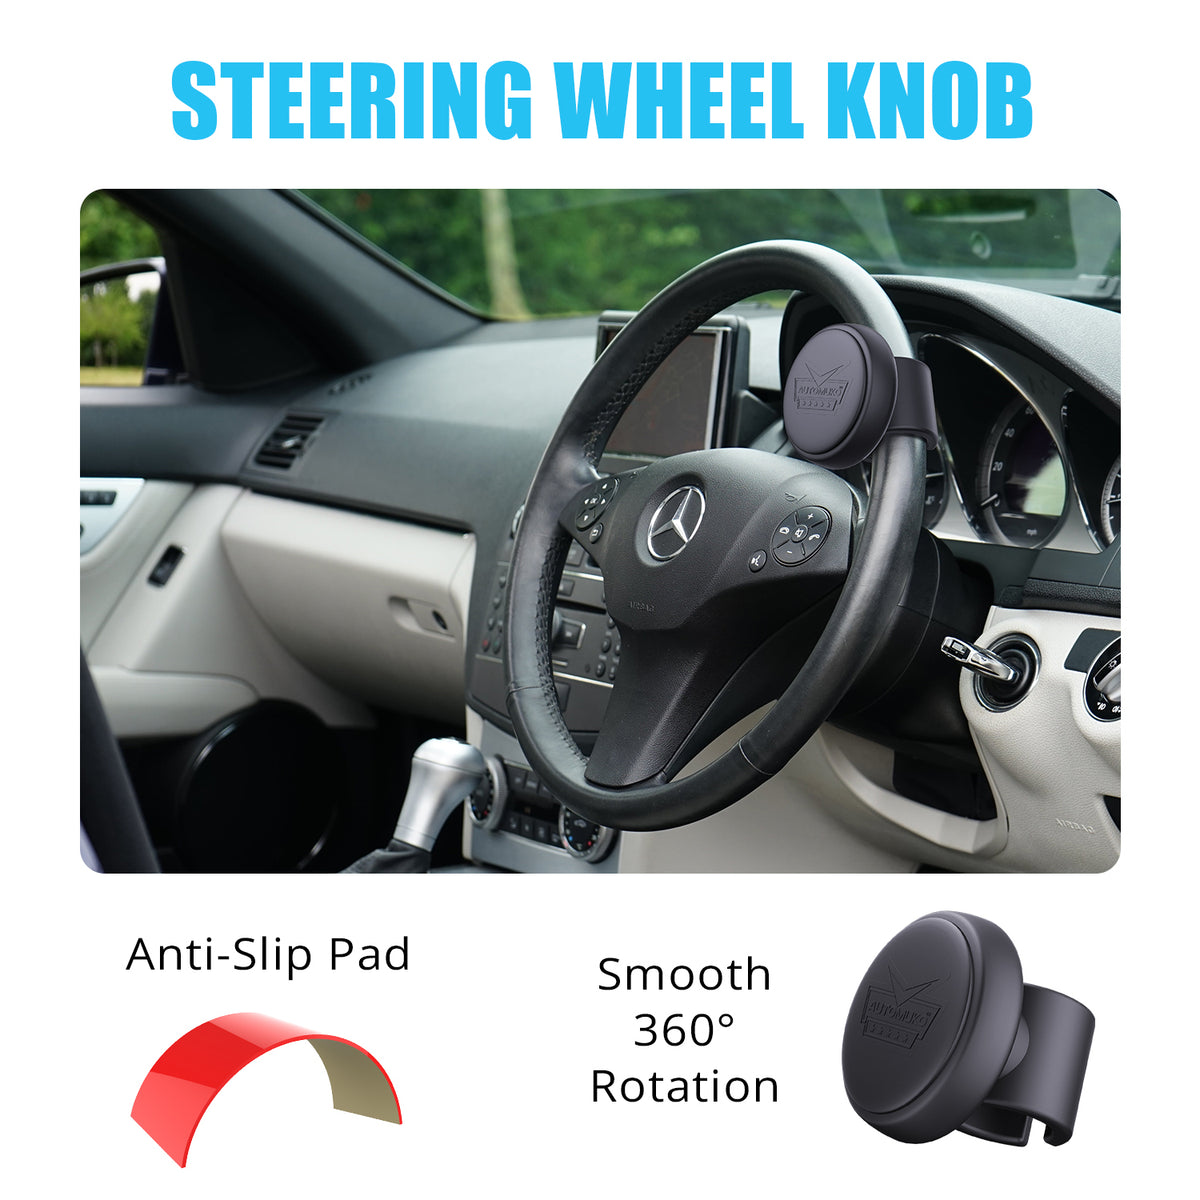 Steering Wheel Spinner, by AutoMuko Silicone Power Handle, steering wheel knob, Easy installation No tools required (Black)